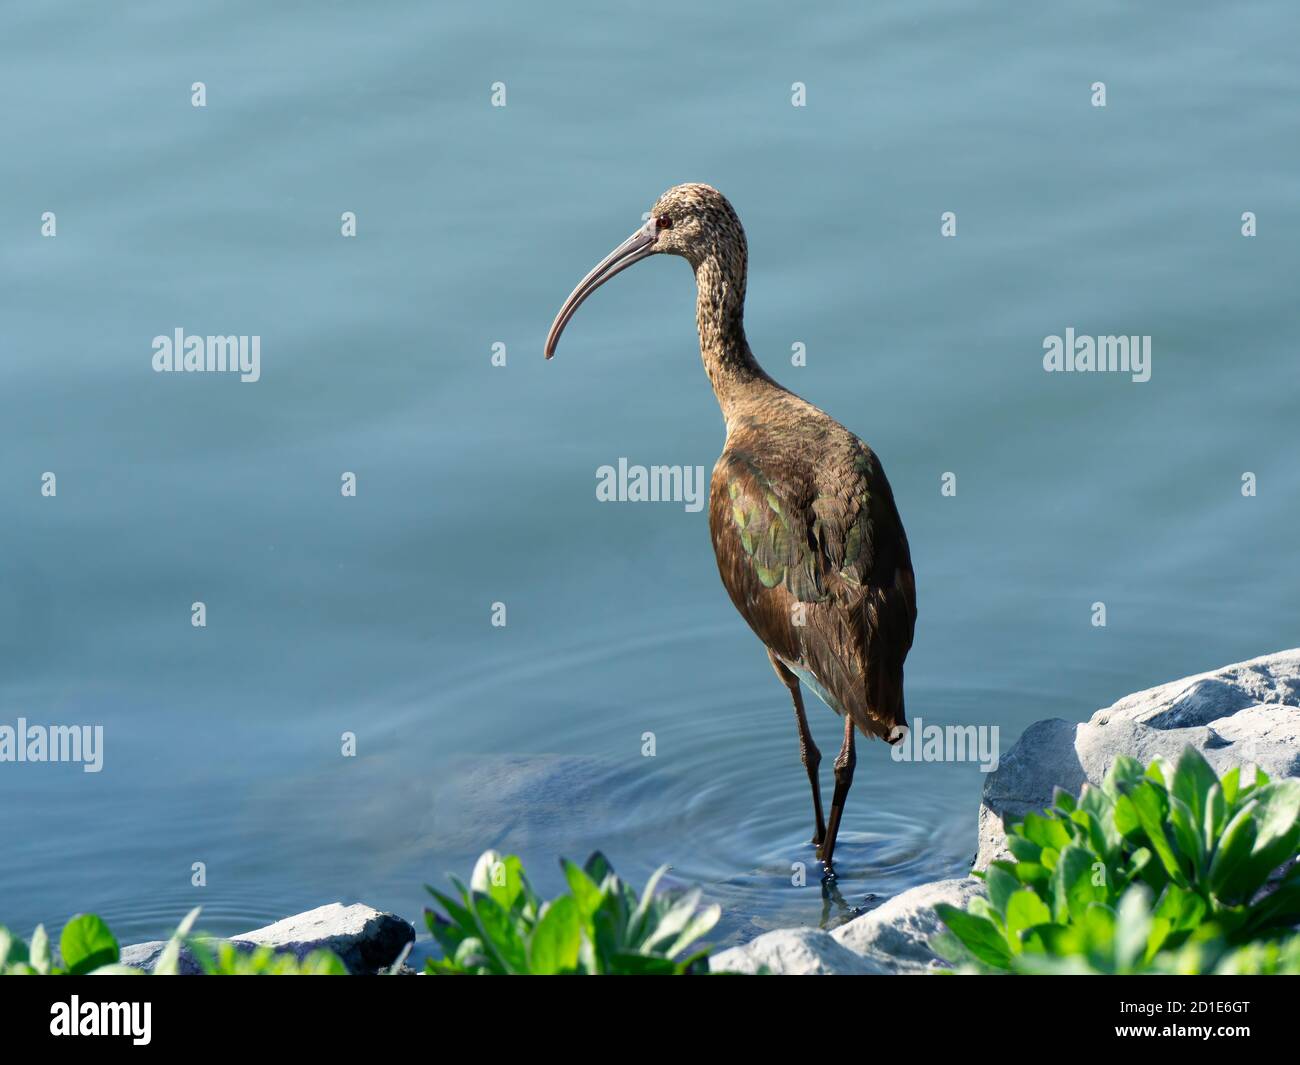 A Glossy Ibis standing in a pond Stock Photo